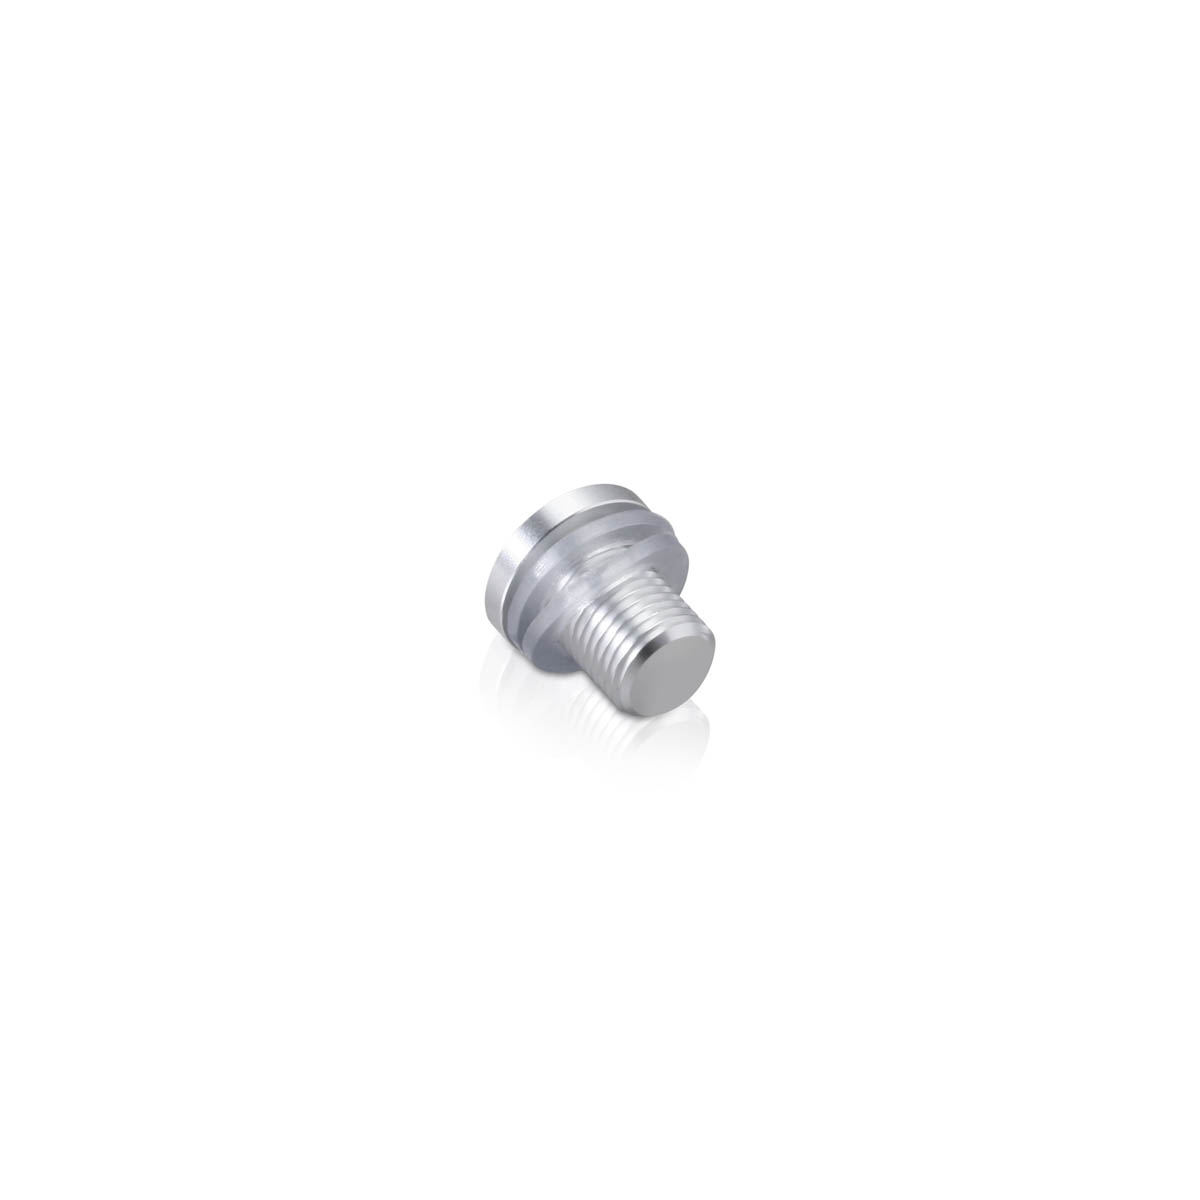 AL16-12A Head replacement for Mbs-Standoffs 5/8'' Diameter x 1/2'' Barrel Length, Aluminum Clear Anodized Finish Standoffs (Includes 2 Silicone Washers).